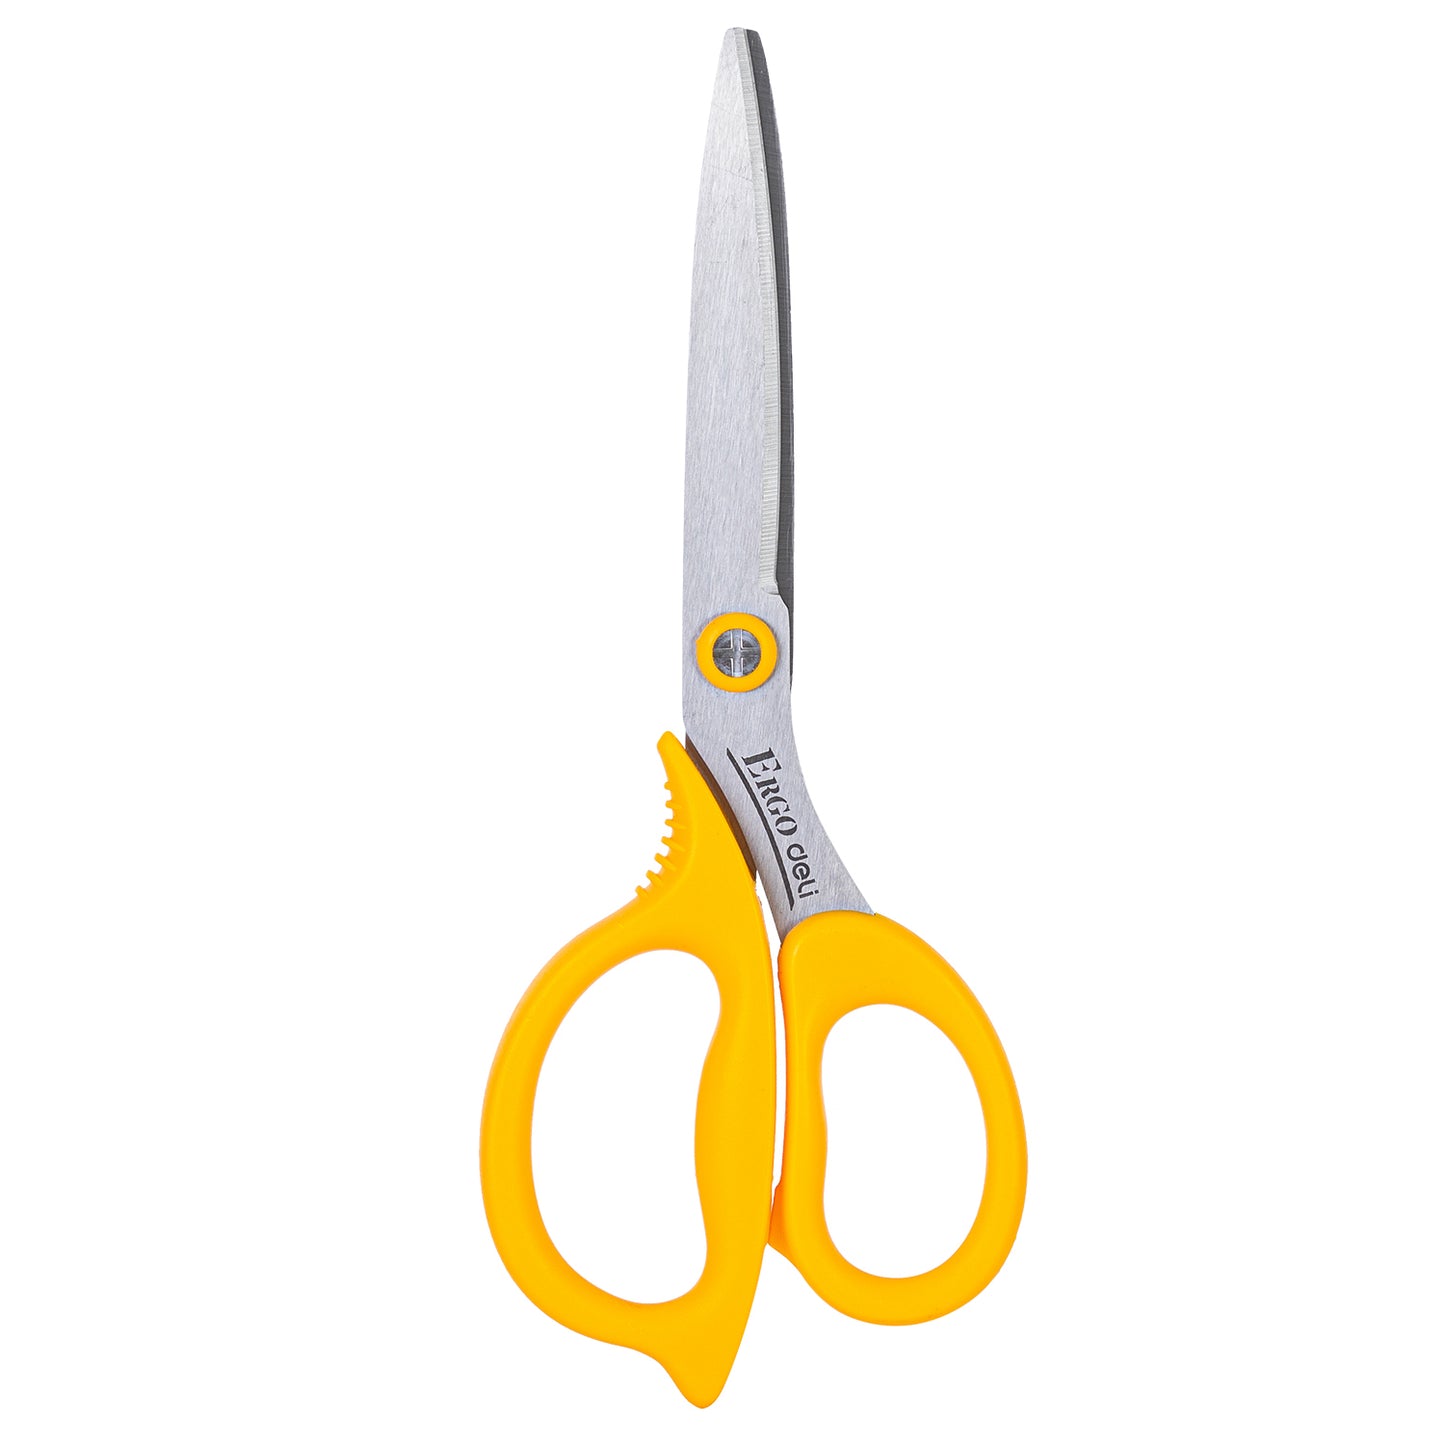 DELI W77760 SCISSORS 210 mm - Color May Vary